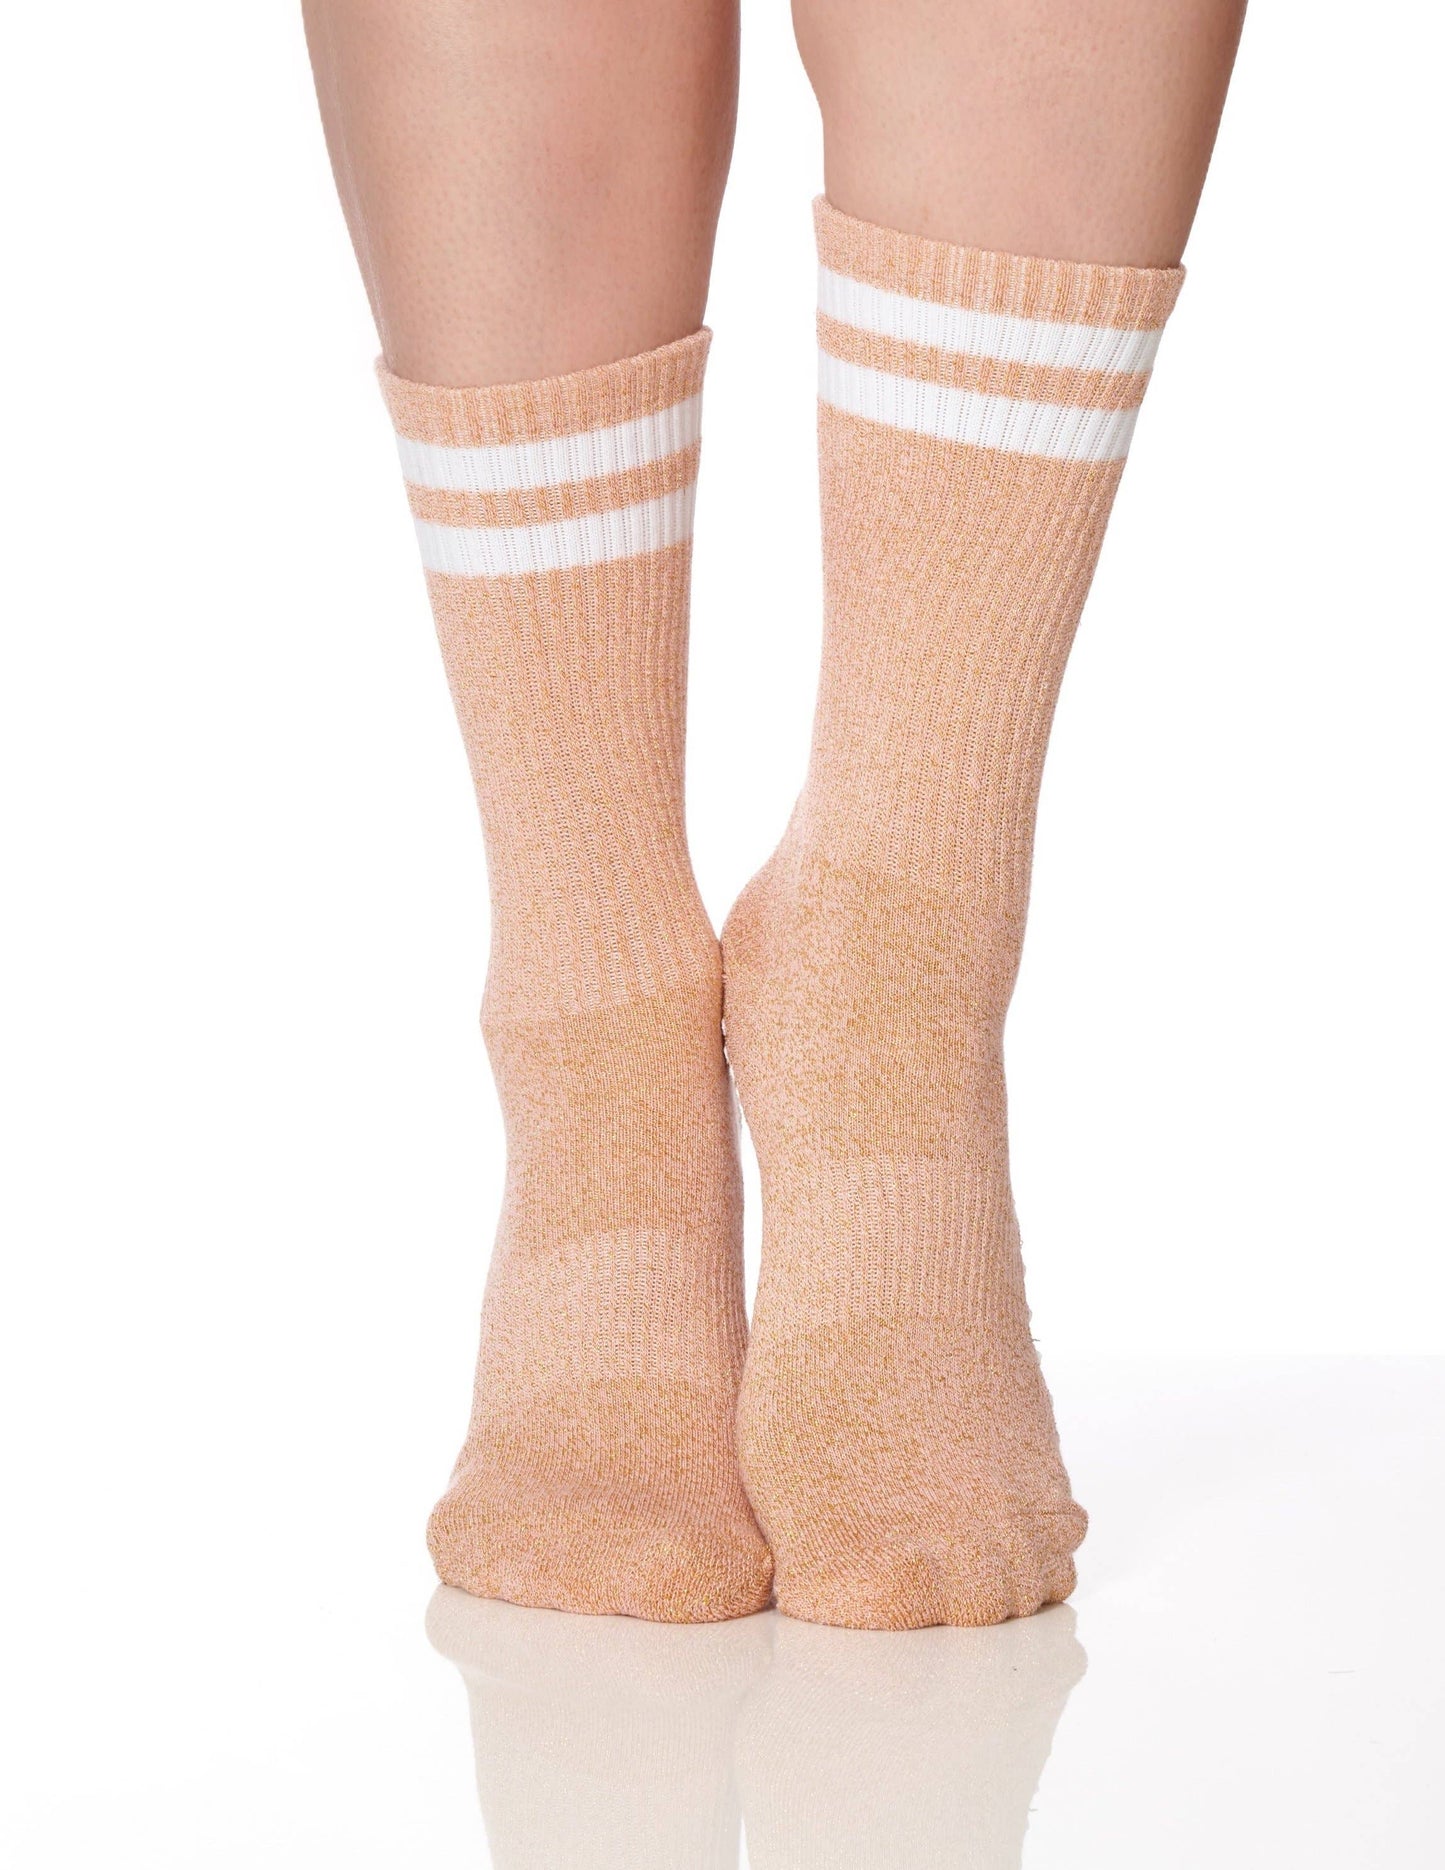 The Dad Sock Glittery Rose Gold, One Size